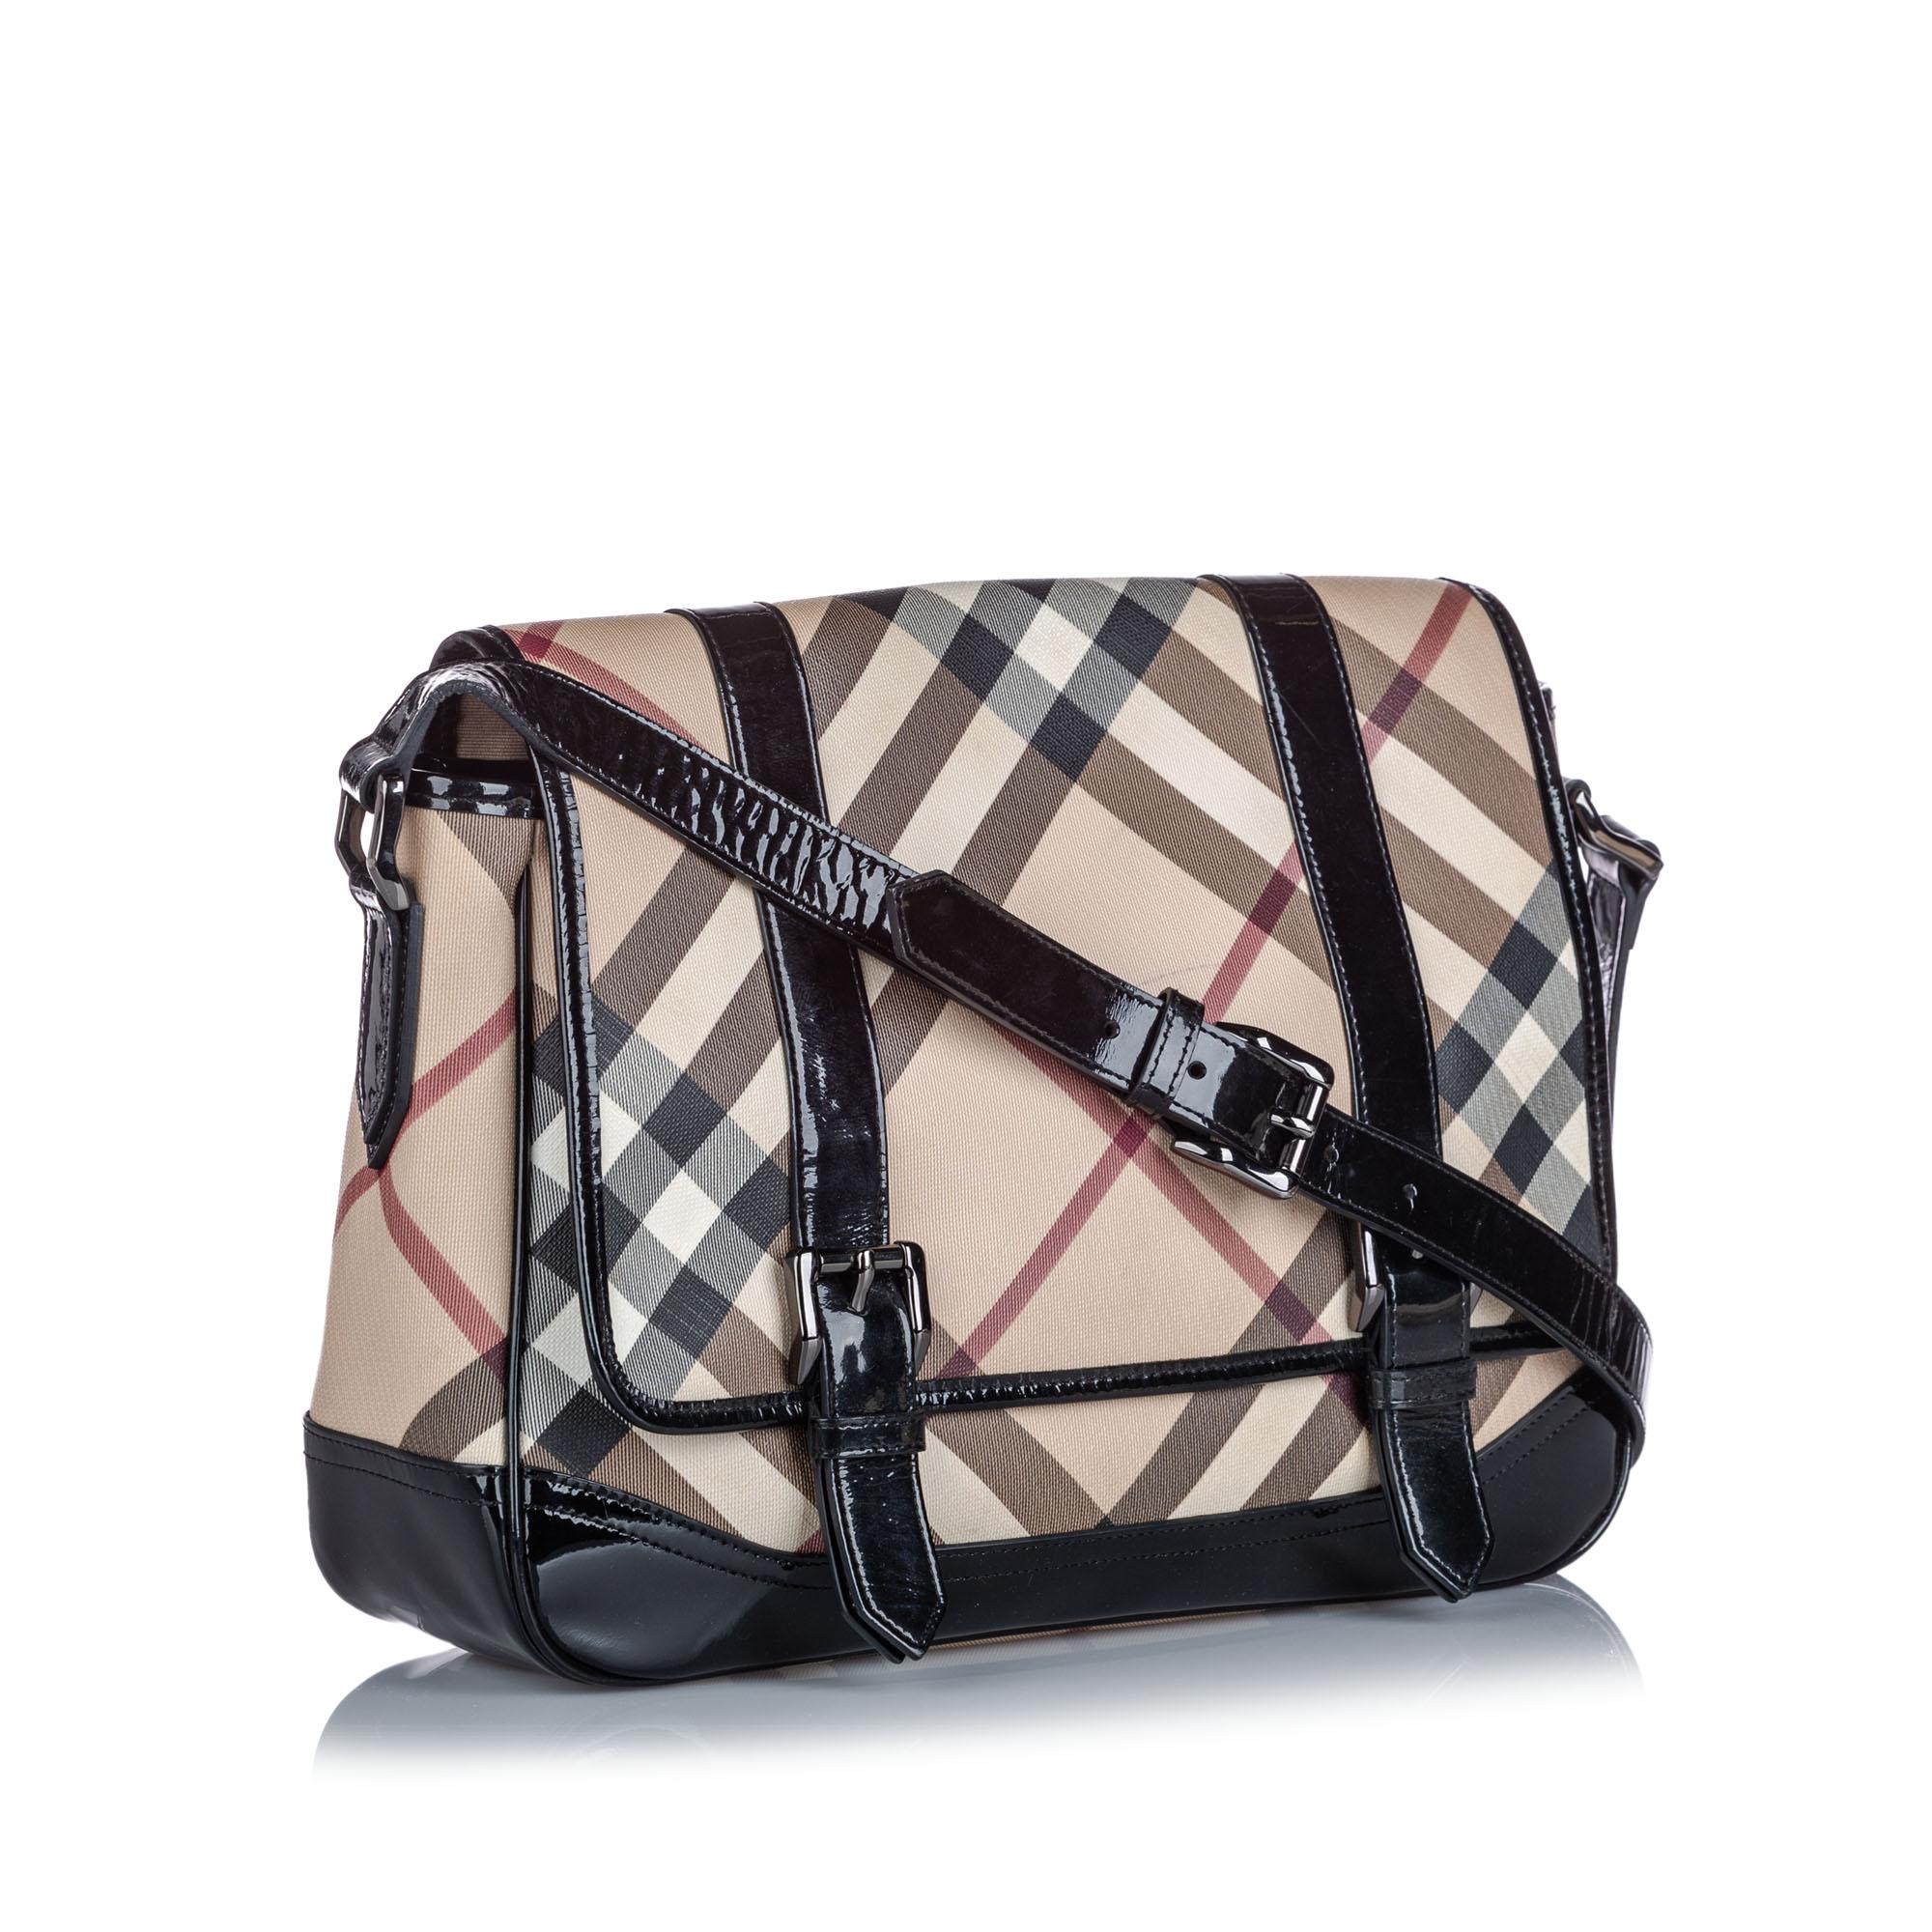 This crossbody bag features a plaid coated canvas body with patent leather trim, a flat patent leather strap, a top flap with magnetic closures, and interior slip pockets. It carries as B+ condition rating.

Inclusions: 
Dust Bag
Dimensions:
Length: